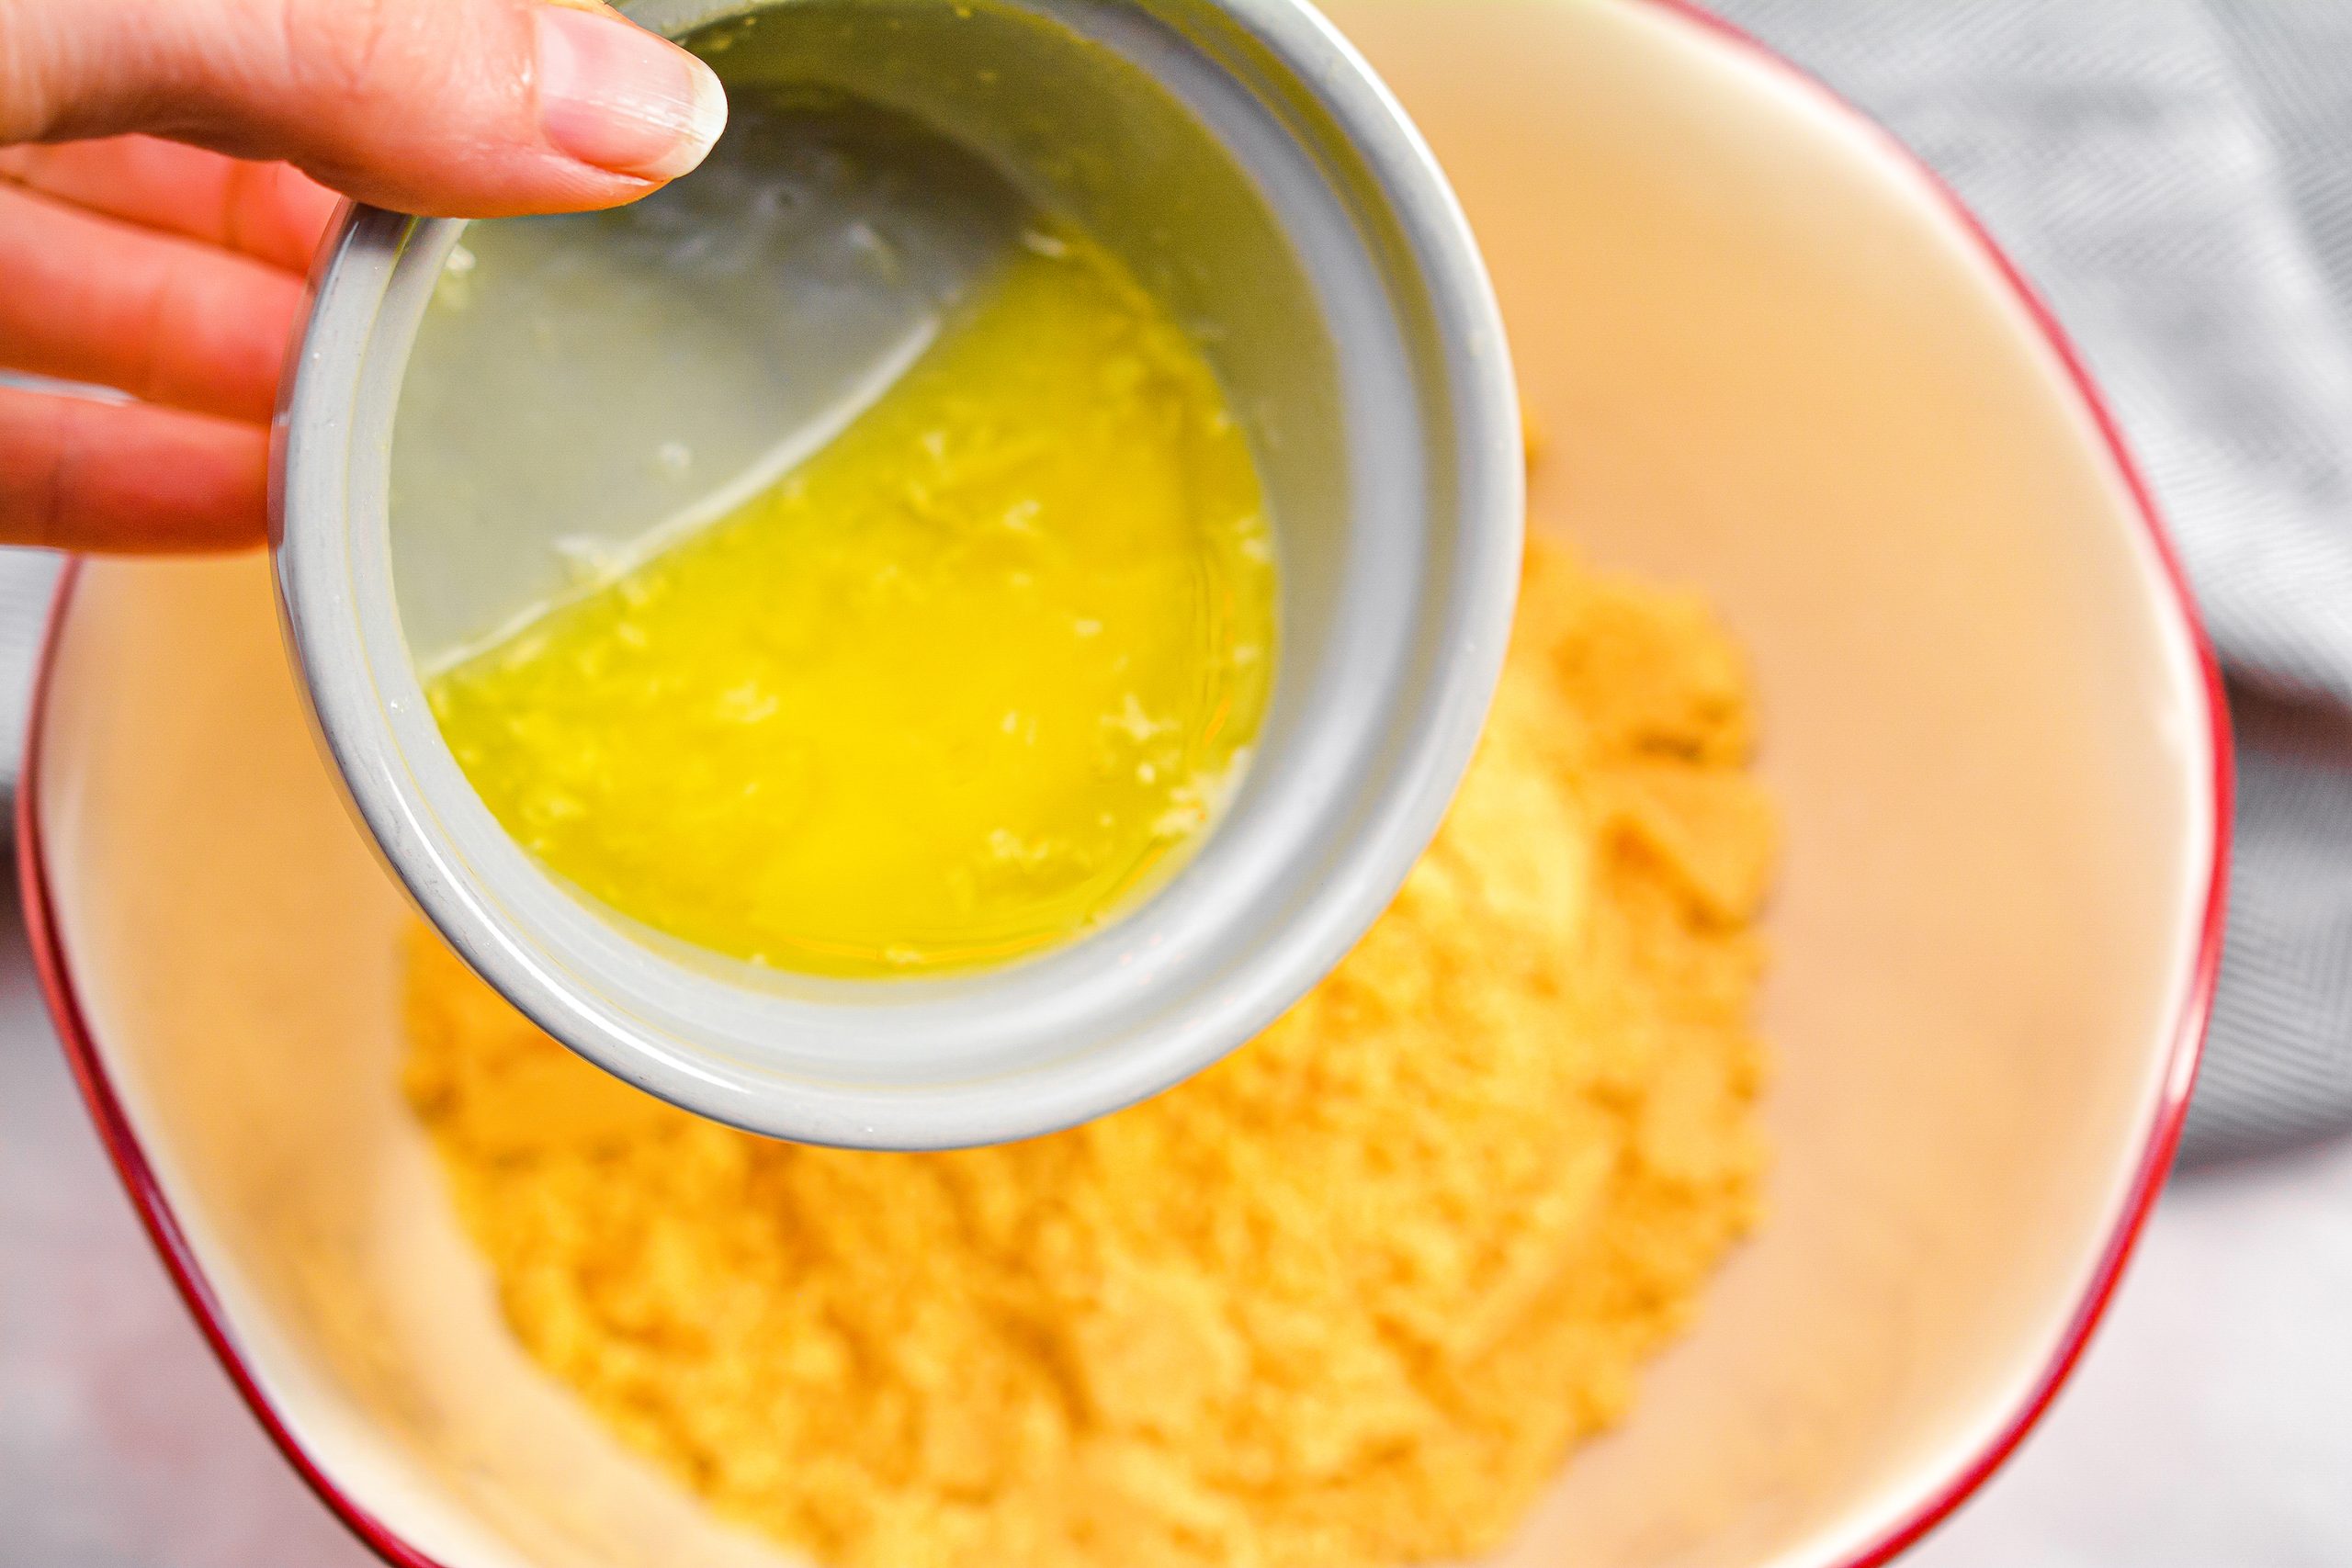 Mix the Jello in with the baked crumbs until well combined.